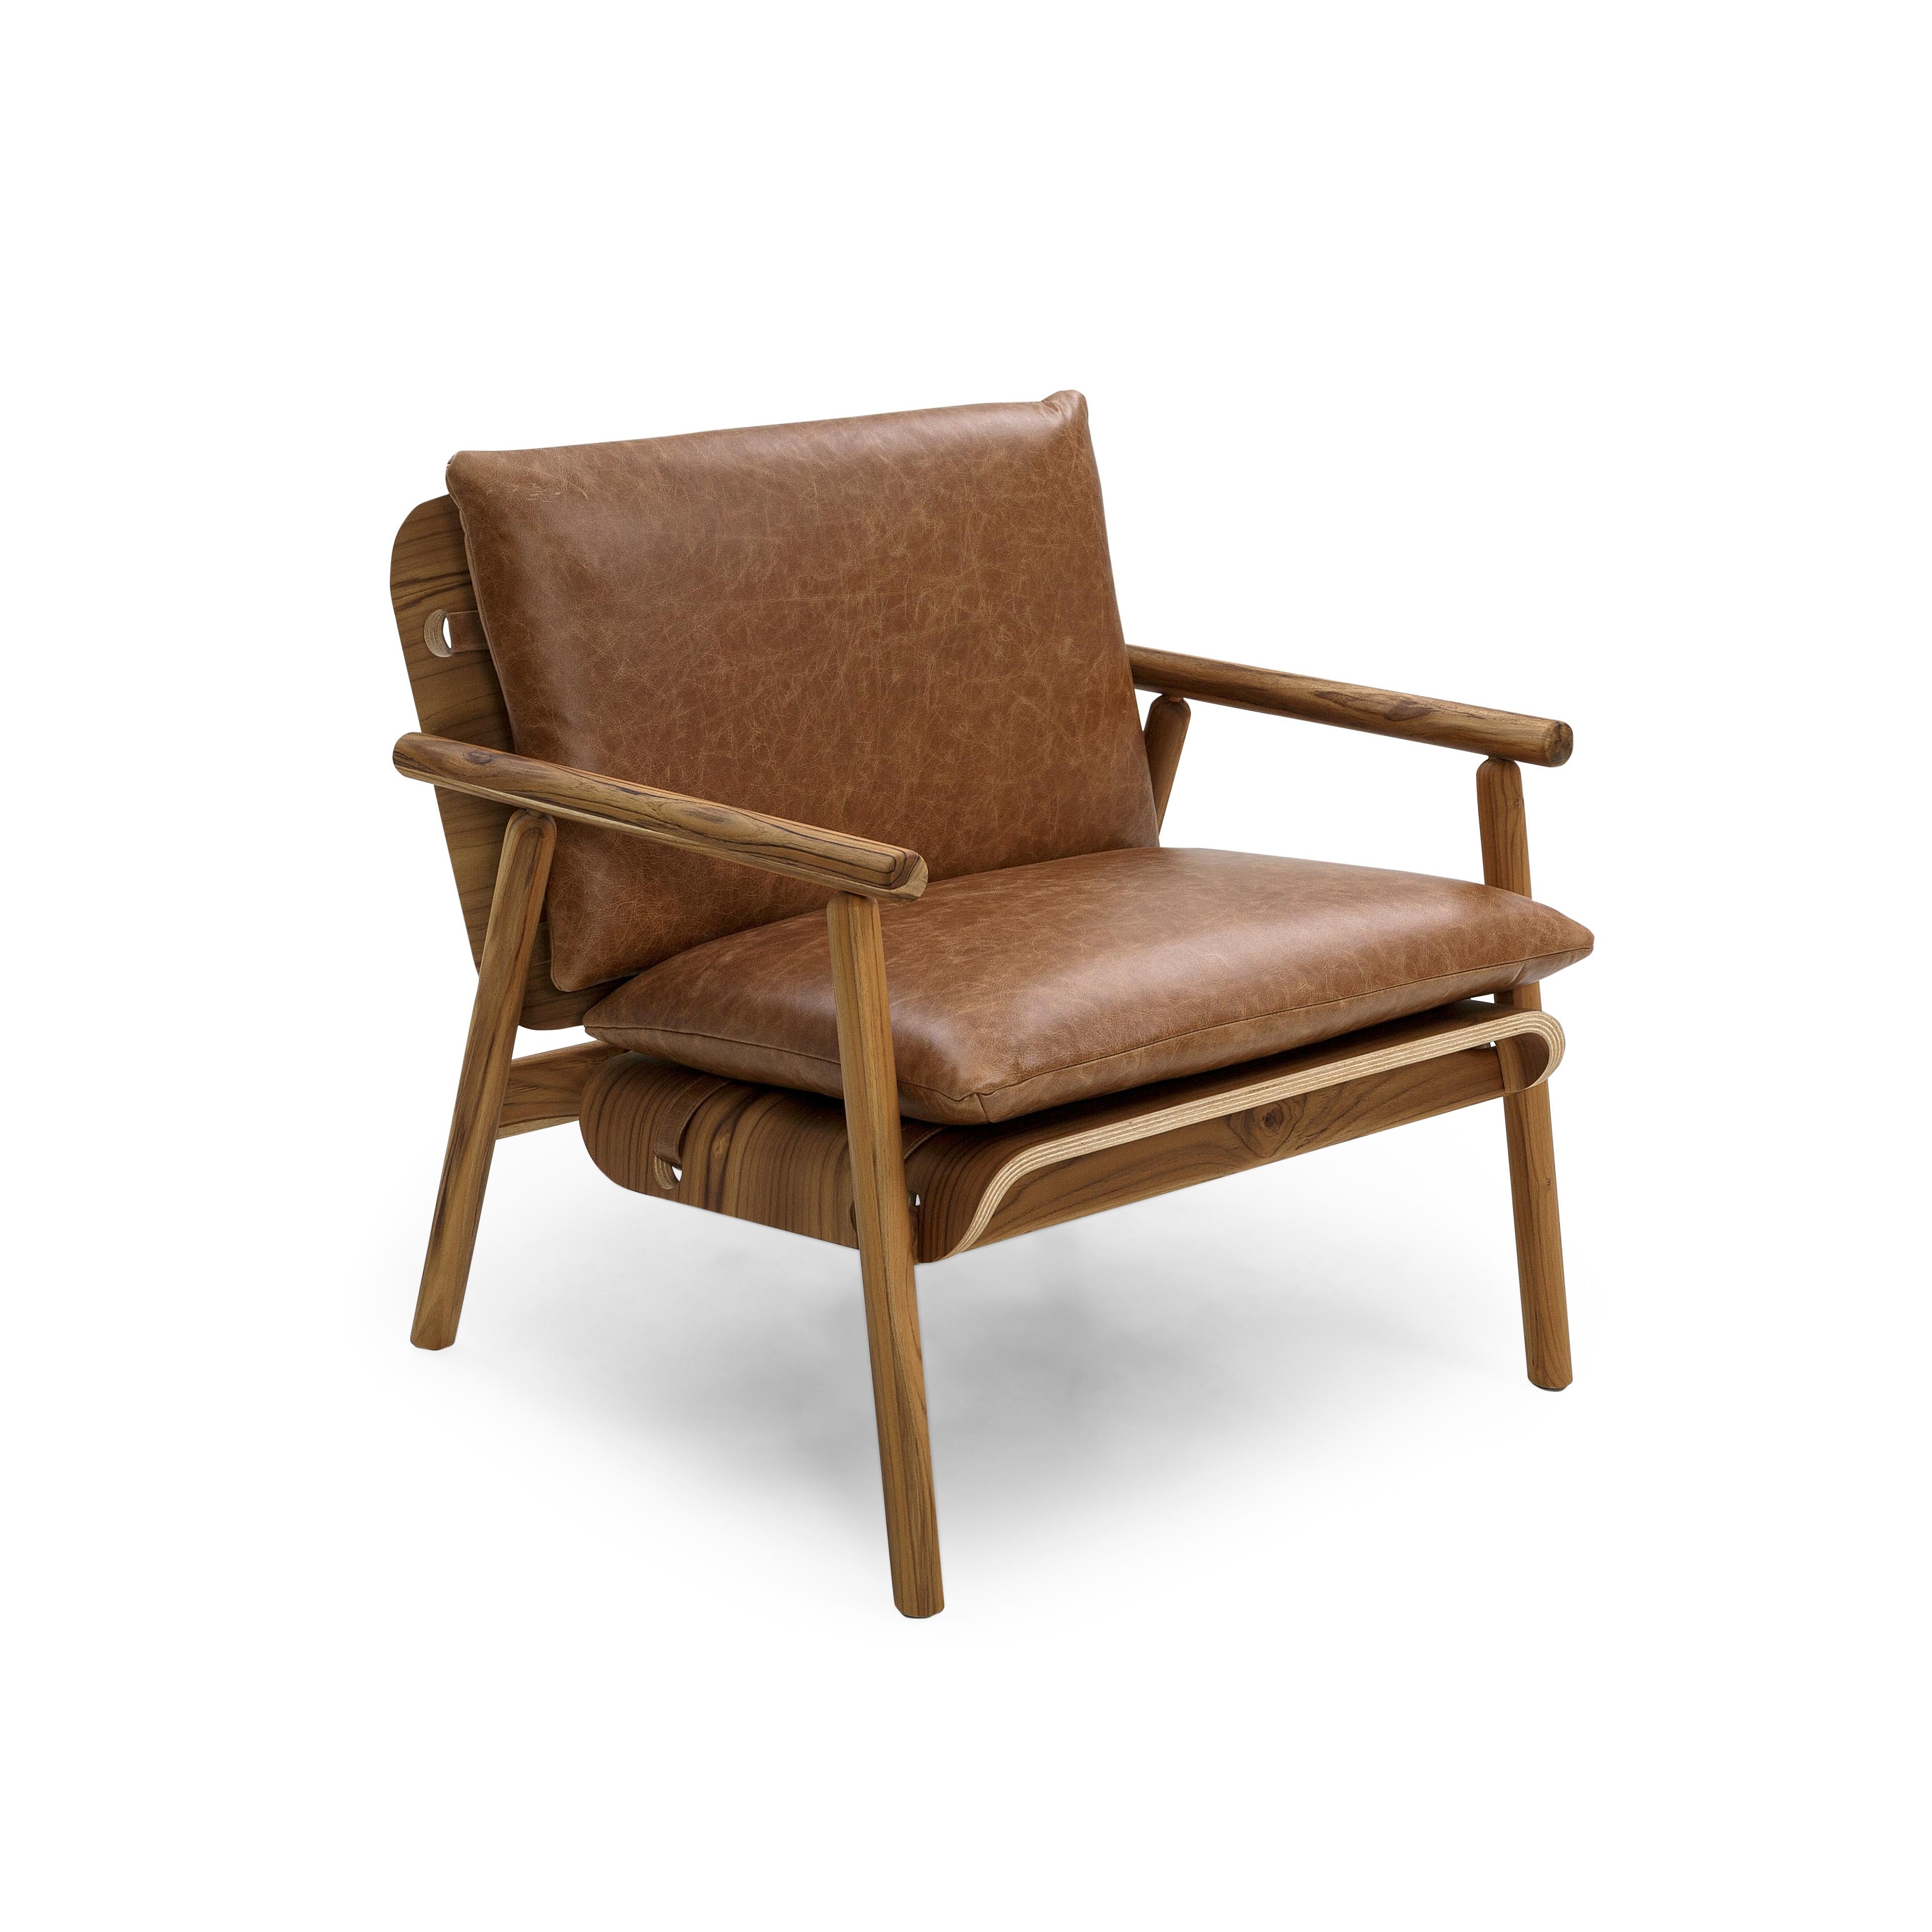 Contemporary Tai Armchair in Teak Wood Finish with Brown Leather Cushions For Sale